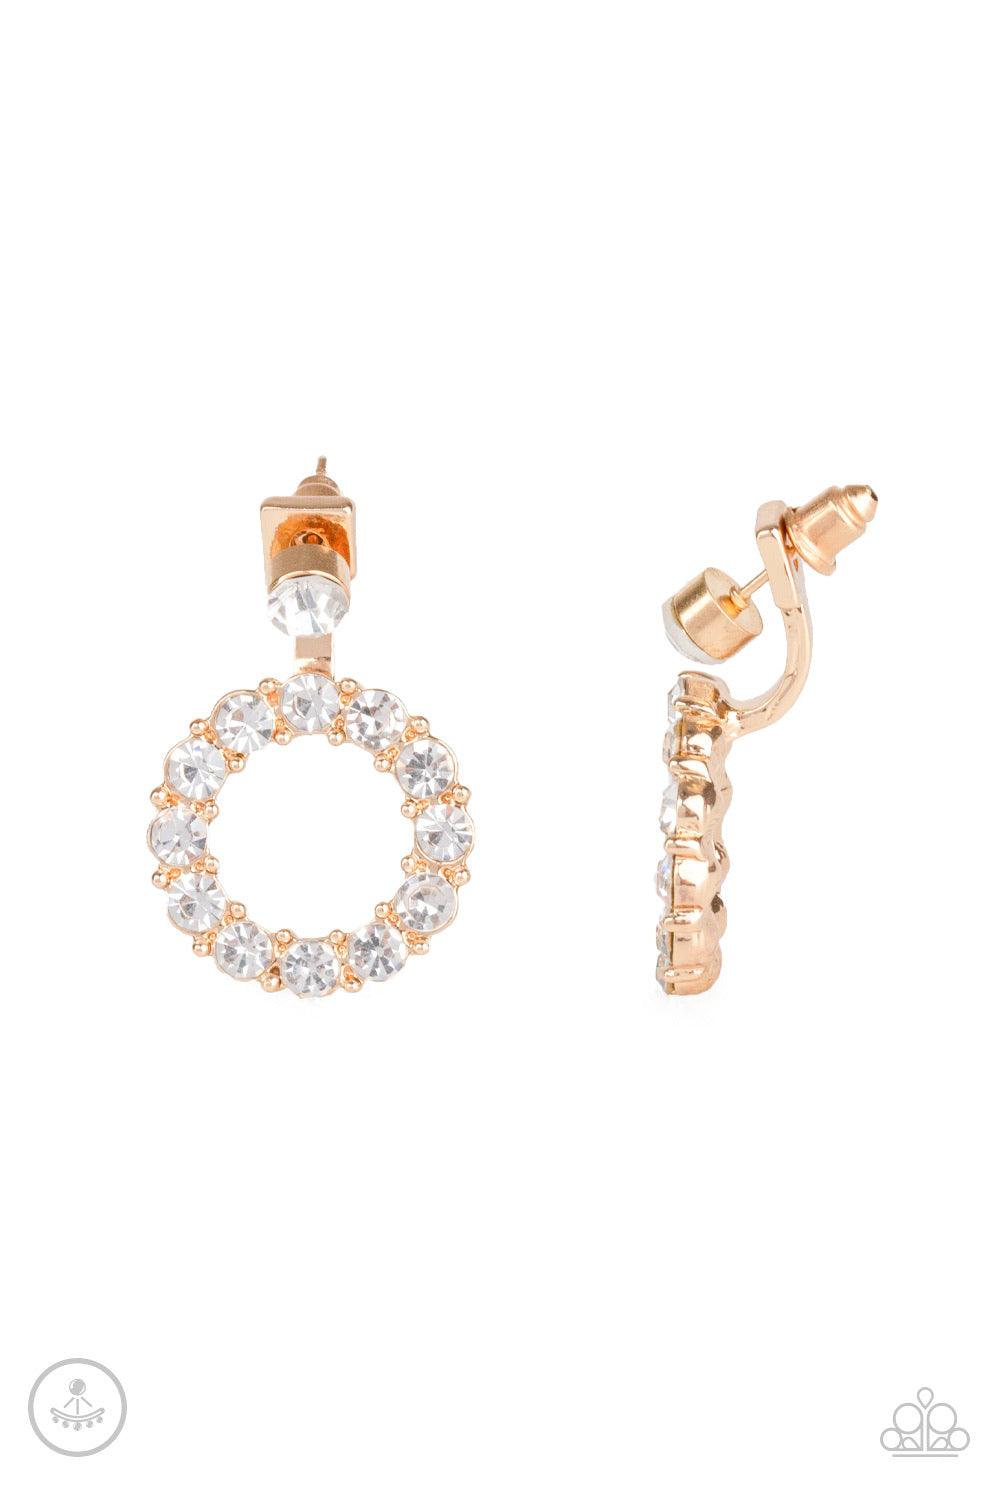 Paparazzi Accessories Diamond Halo - Gold A solitaire white rhinestone attaches to a double-sided post, designed to fasten behind the ear. Encrusted in a ring of glassy white rhinestones, the glittery hoop peeks out beneath the ear for a glamorous look. E